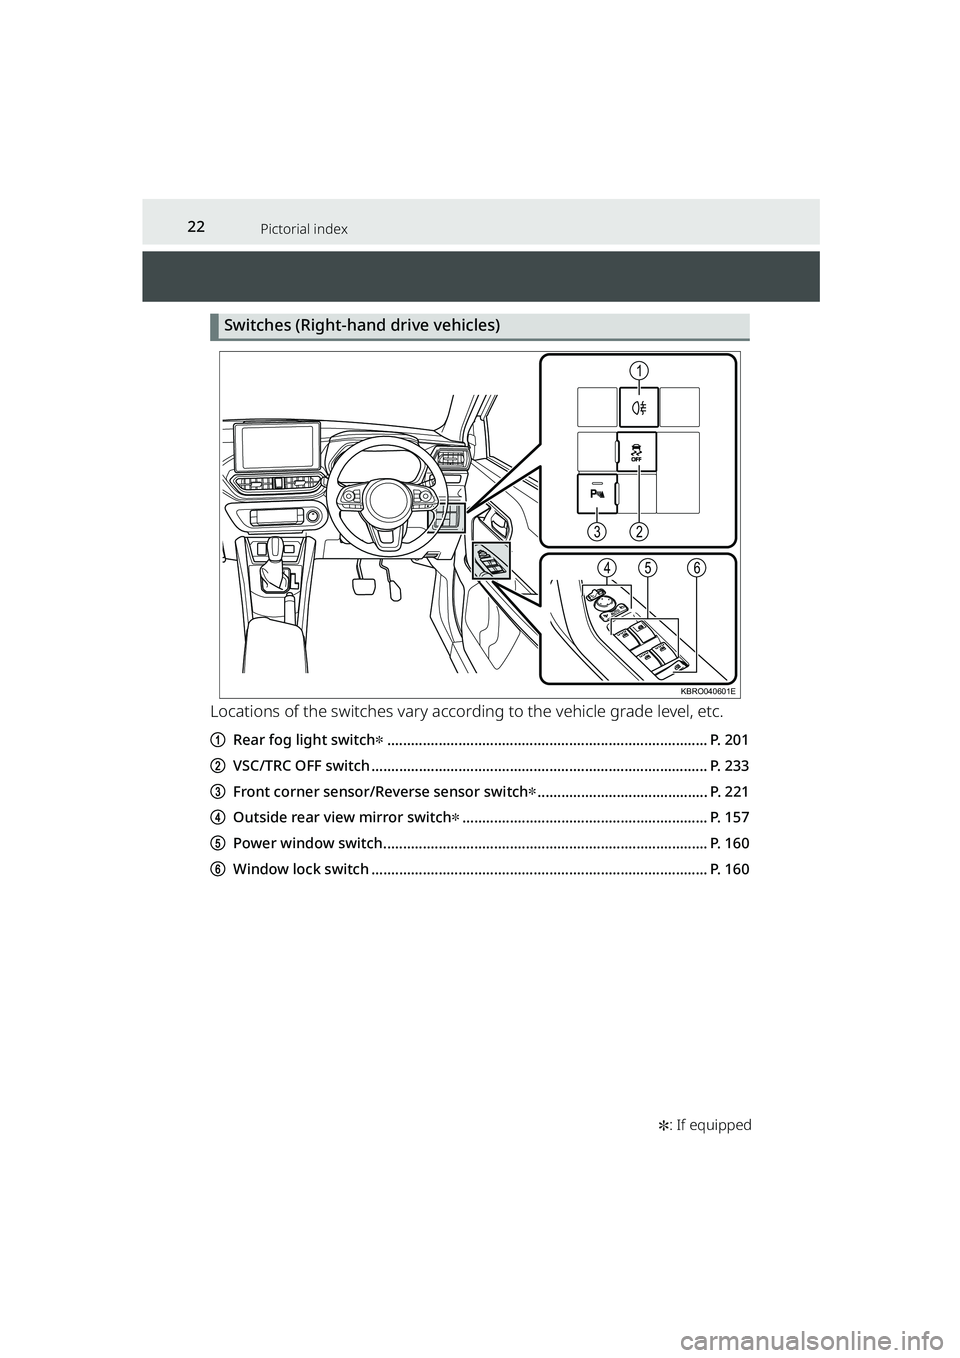 TOYOTA RAIZE 2023  Owners Manual 22Pictorial index
RAIZE_OM_General_BZ358E✽
: If equipped
Switches (Right-hand drive vehicles)
Locations of the switches vary acco rding to the vehicle grade level, etc.
aRear fog light switch✽....